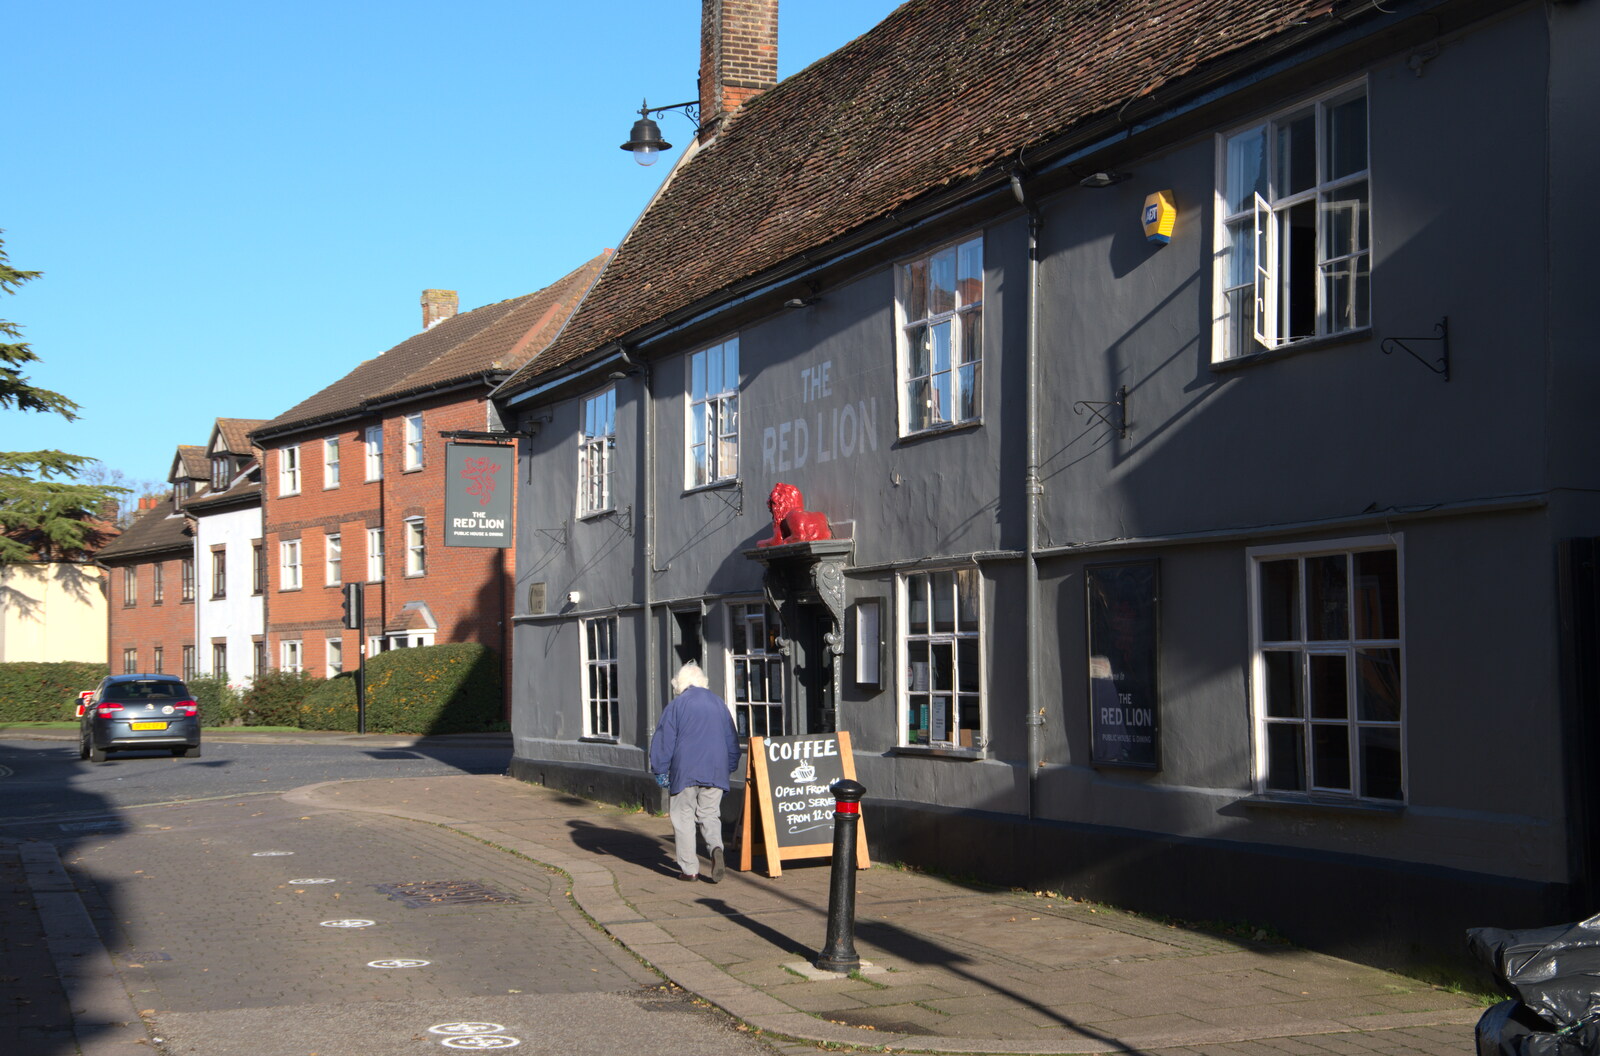 The Red Lion from Isobel's Birthday, Woodbridge, Suffolk - 2nd November 2020